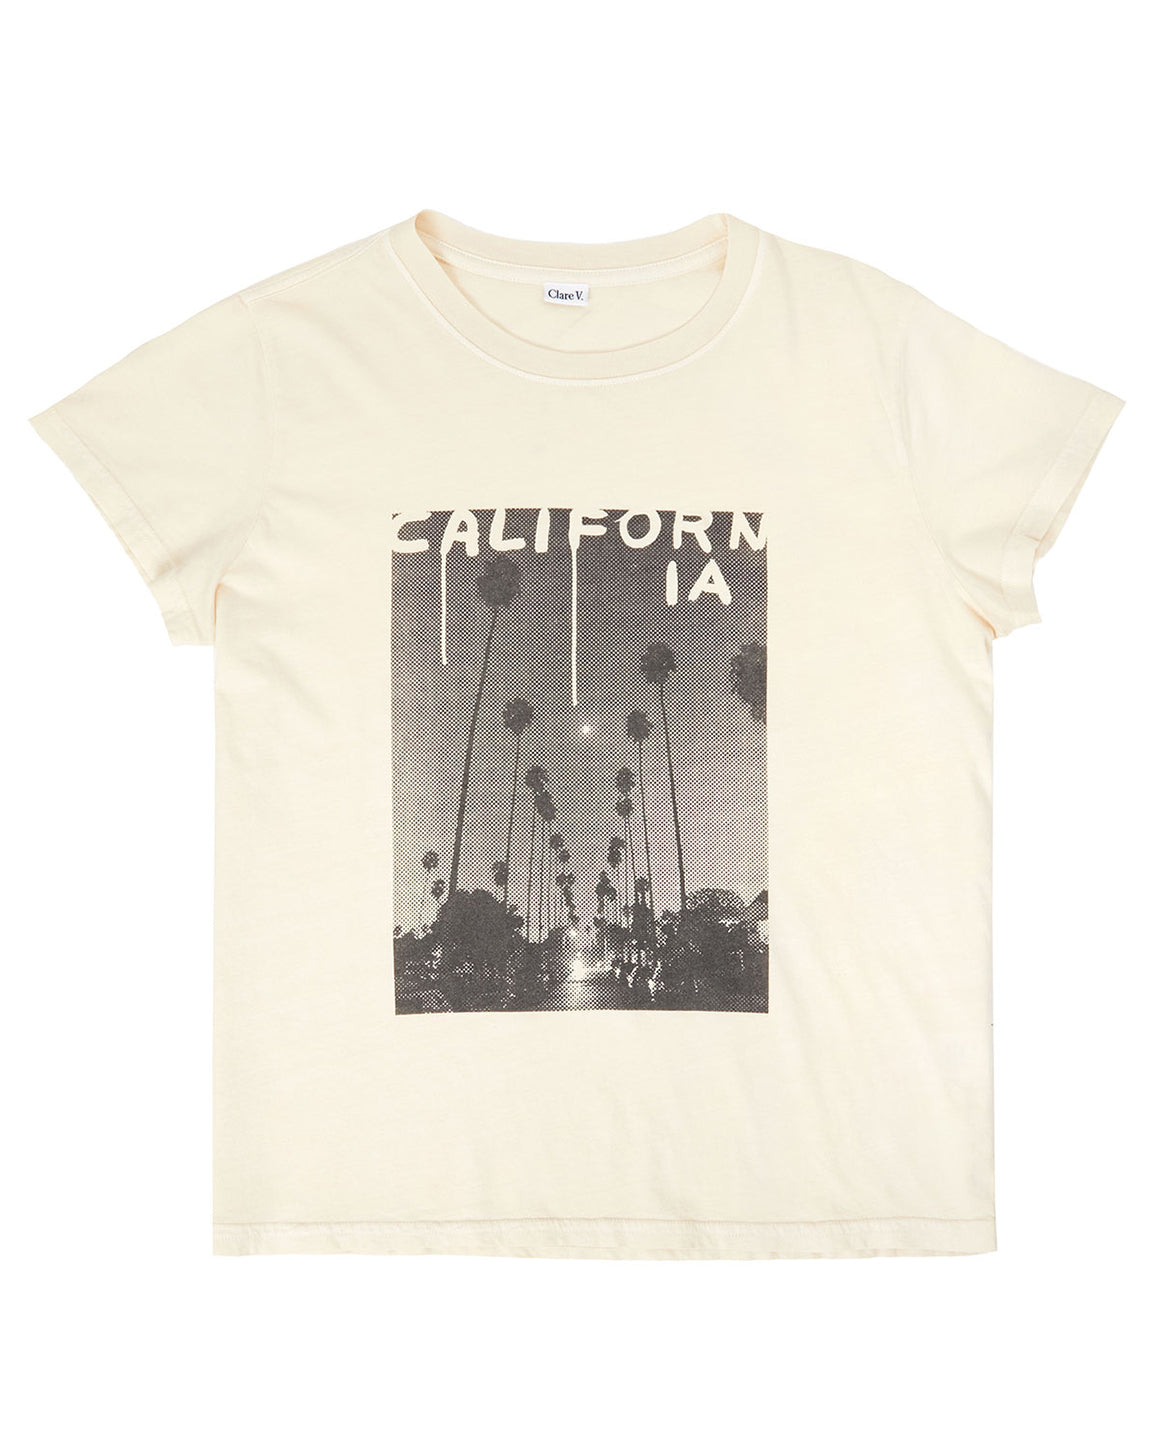 Clare V. Classic Tee in Cream w/ Black Thierry Palm California